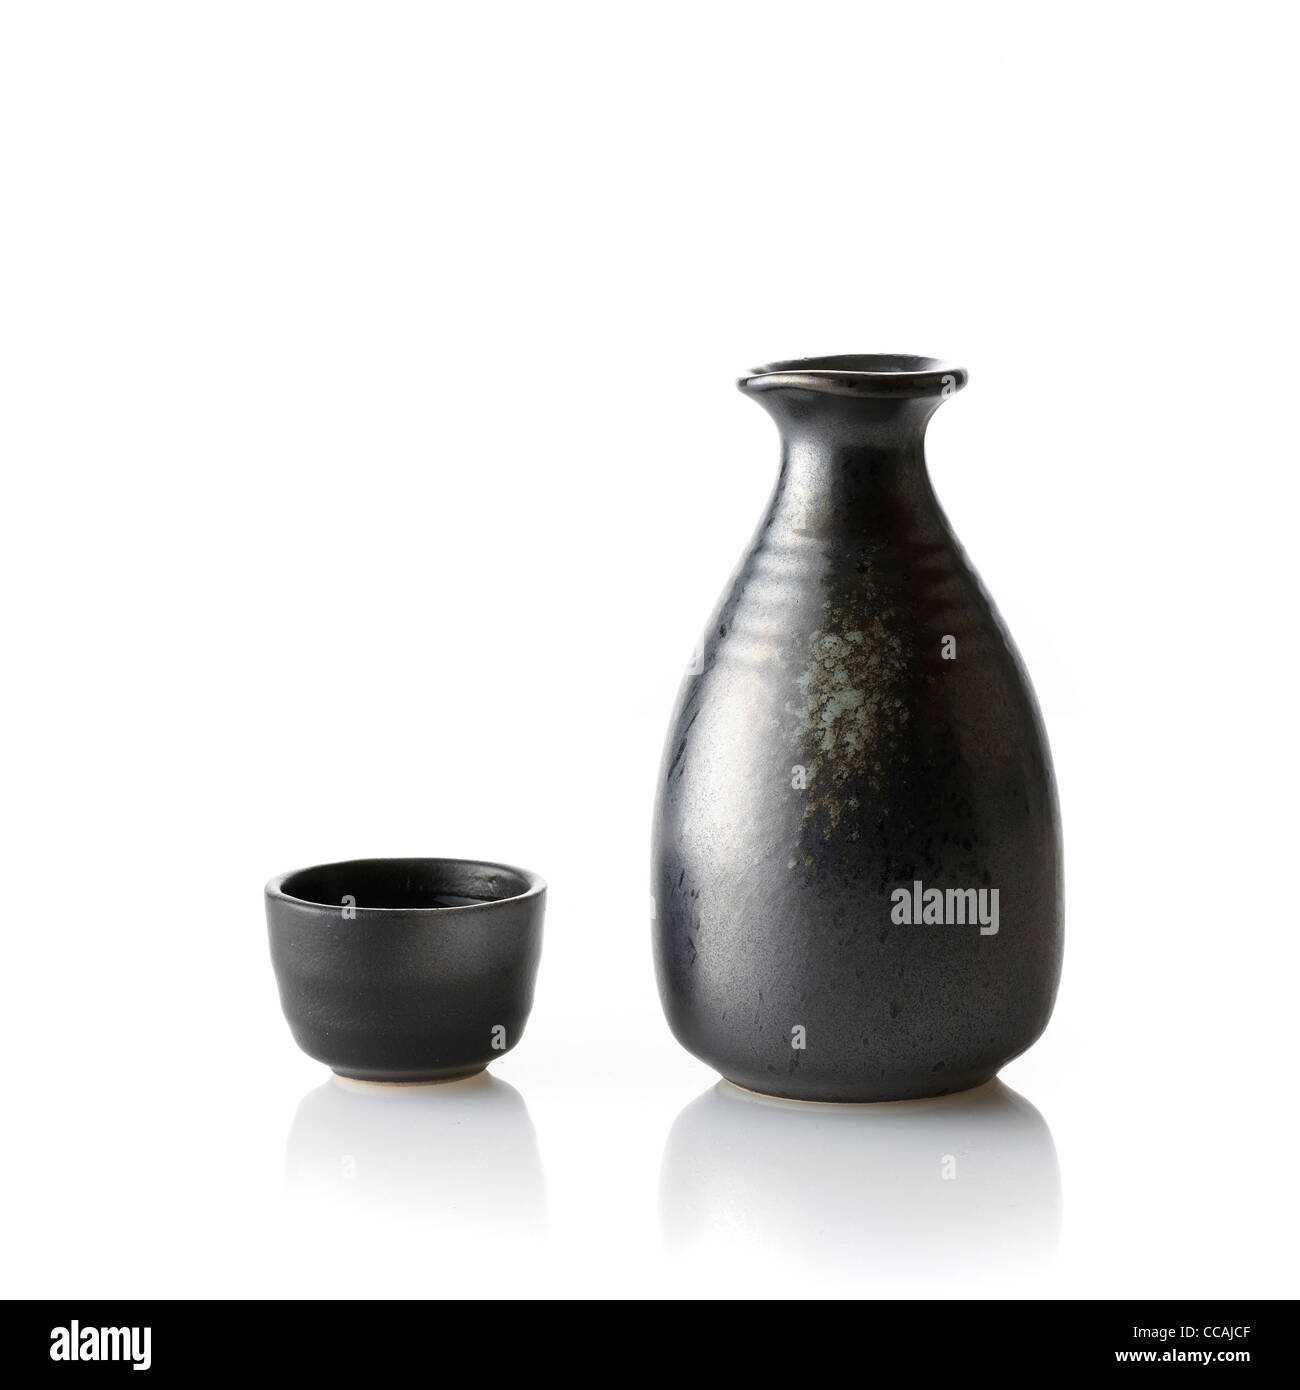 Sake decanter and cup Stock Photo